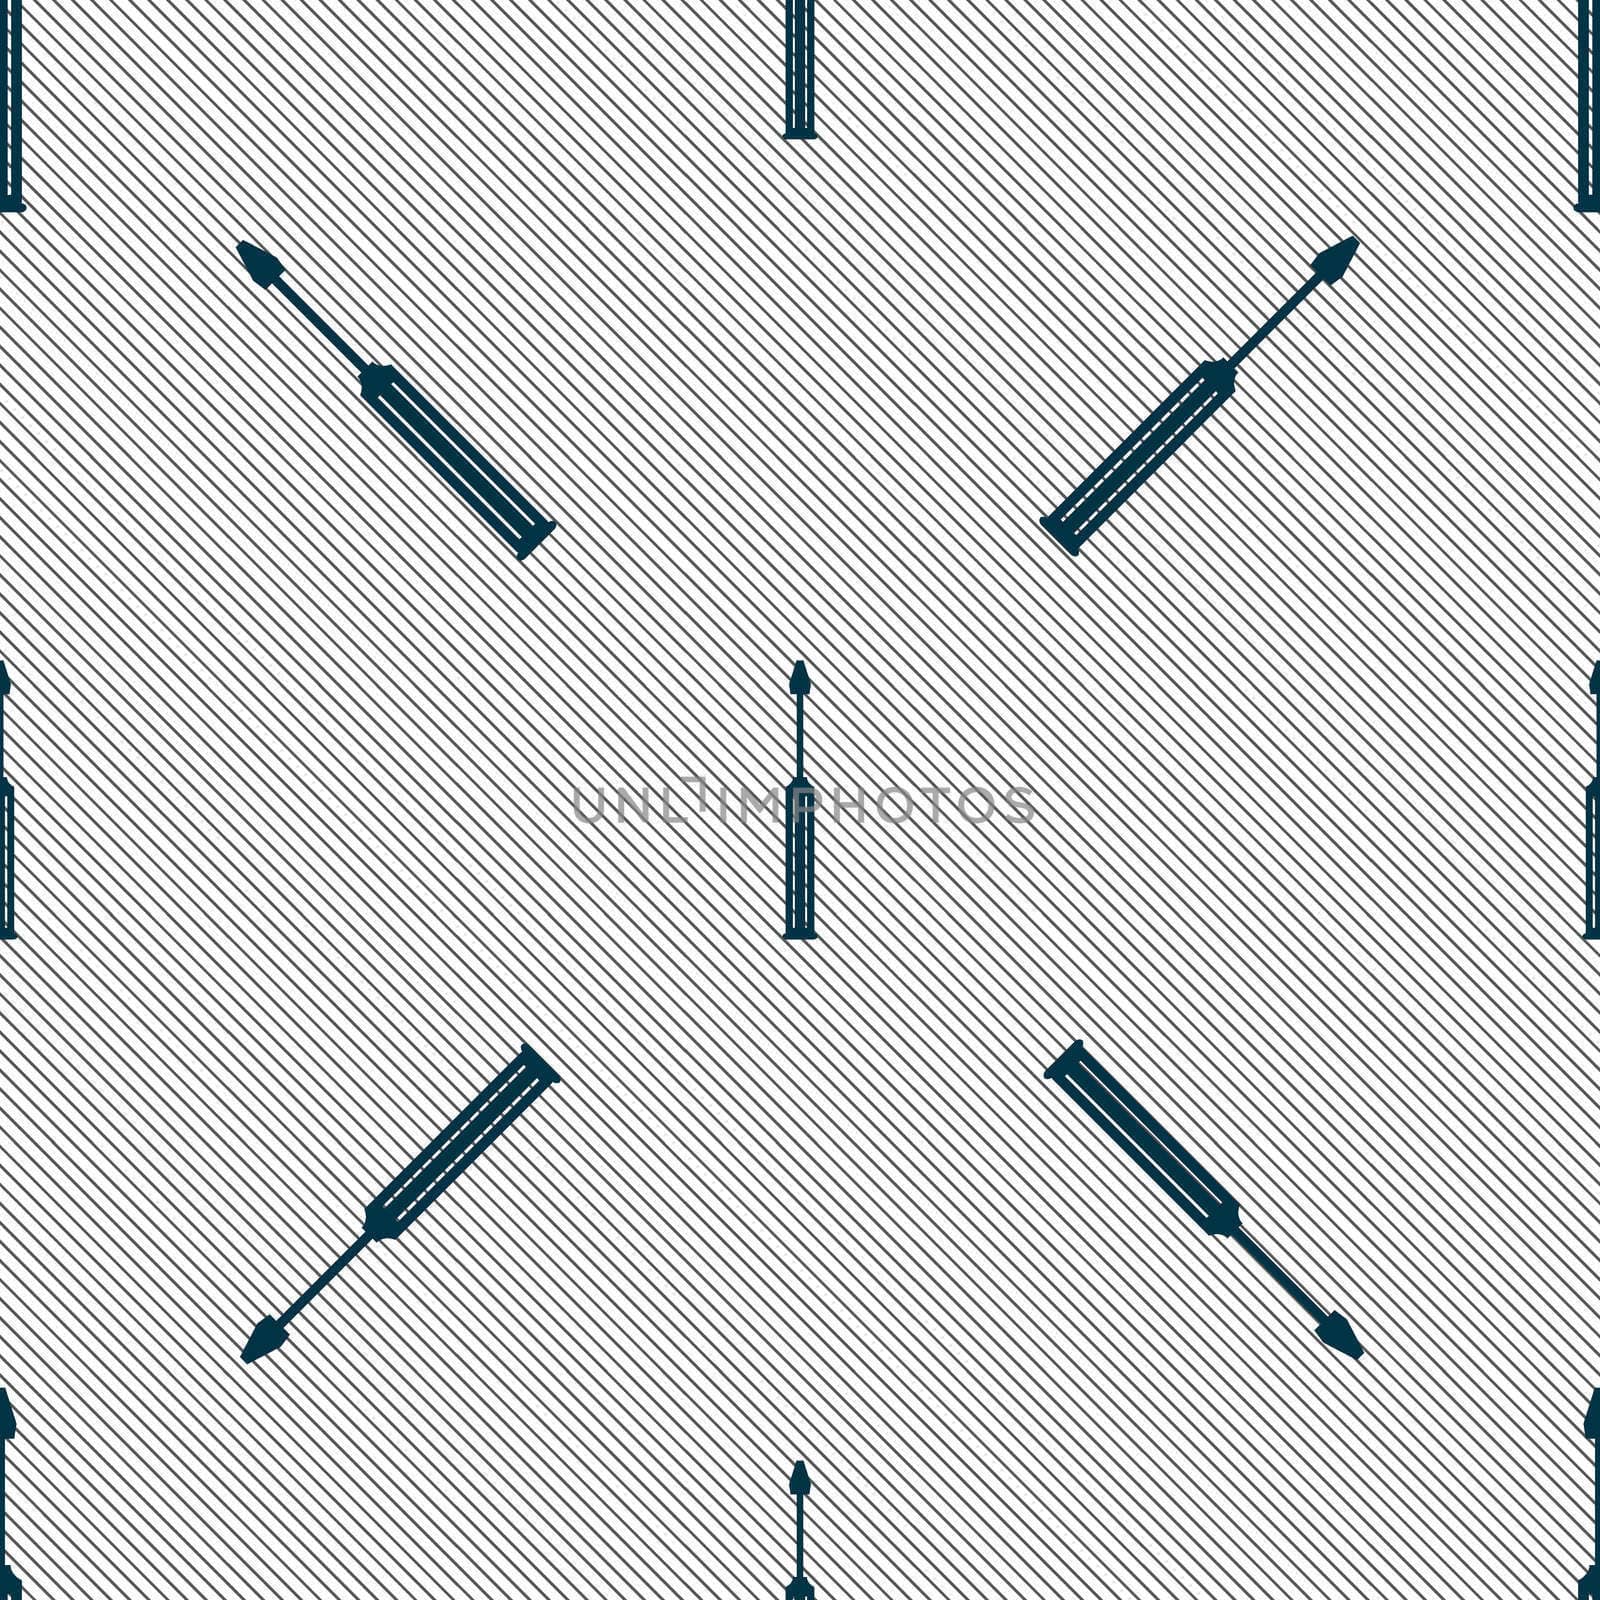 Screwdriver tool sign icon. Fix it symbol. Repair sign. Seamless pattern with geometric texture.  by serhii_lohvyniuk